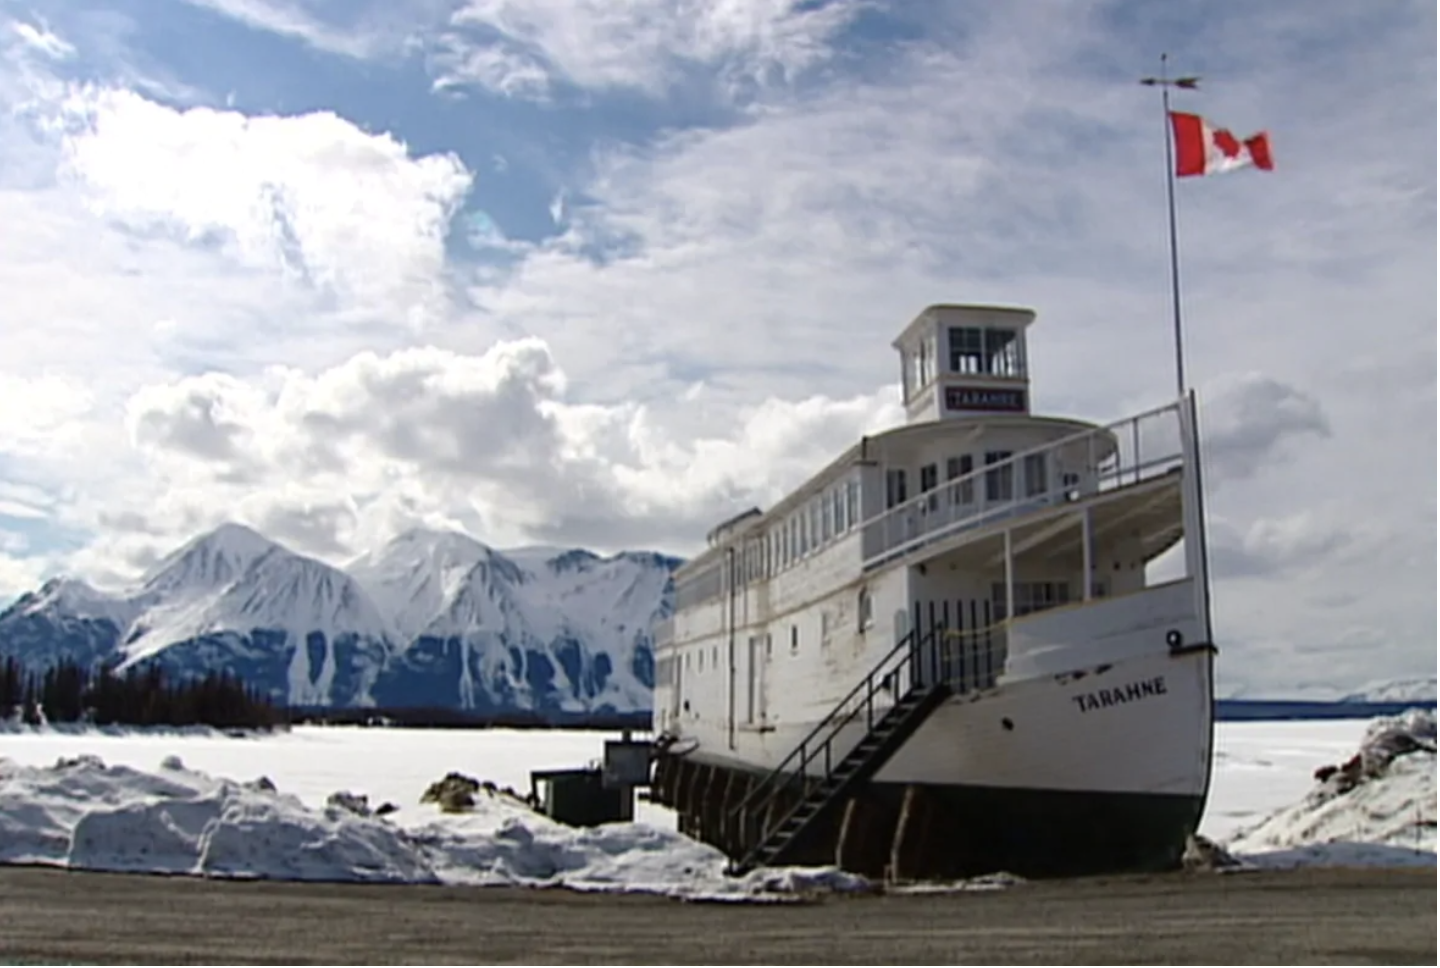 The report said community consultations sometimes heightened tensions between Indigenous and non-Indigenous residents in the small community of Atlin, B.C. (CBC)